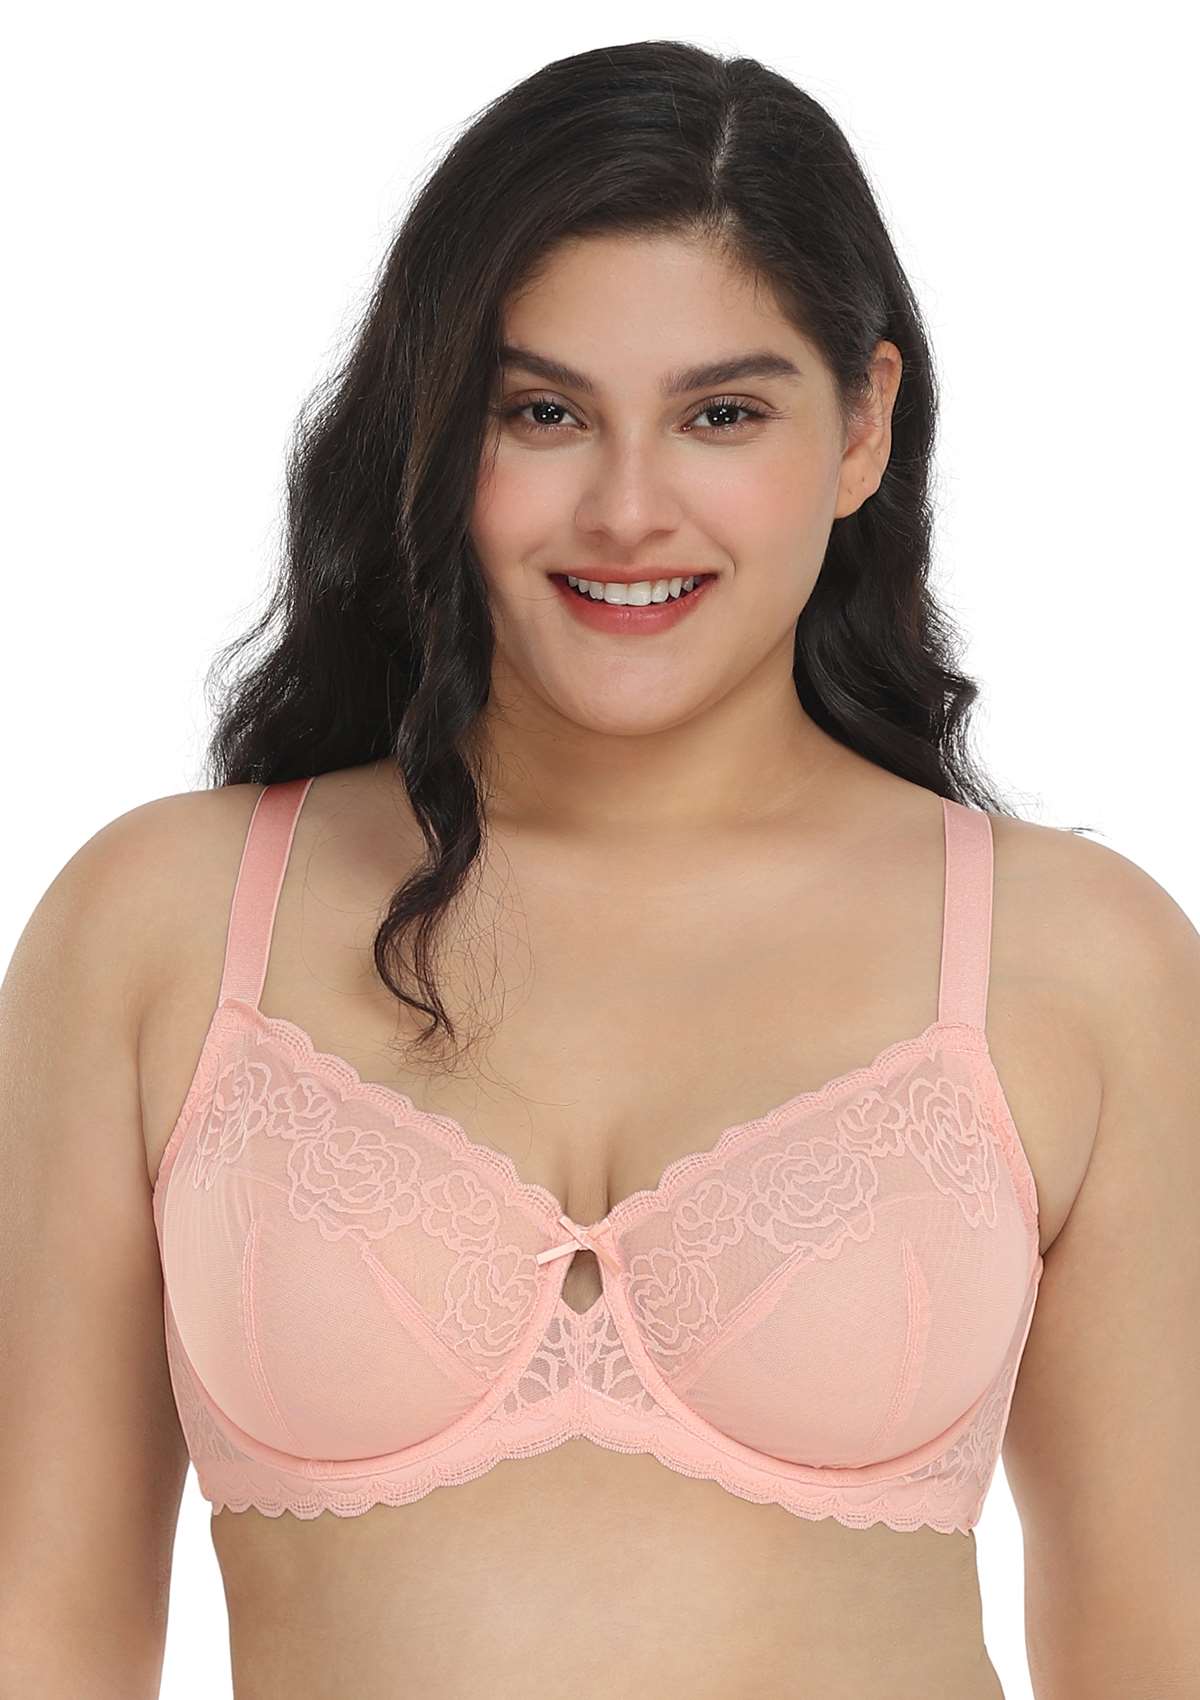 HSIA Rosa Bonica Sheer Lace Mesh Unlined Thin Comfy Woman Bra - Pink / 38 / D